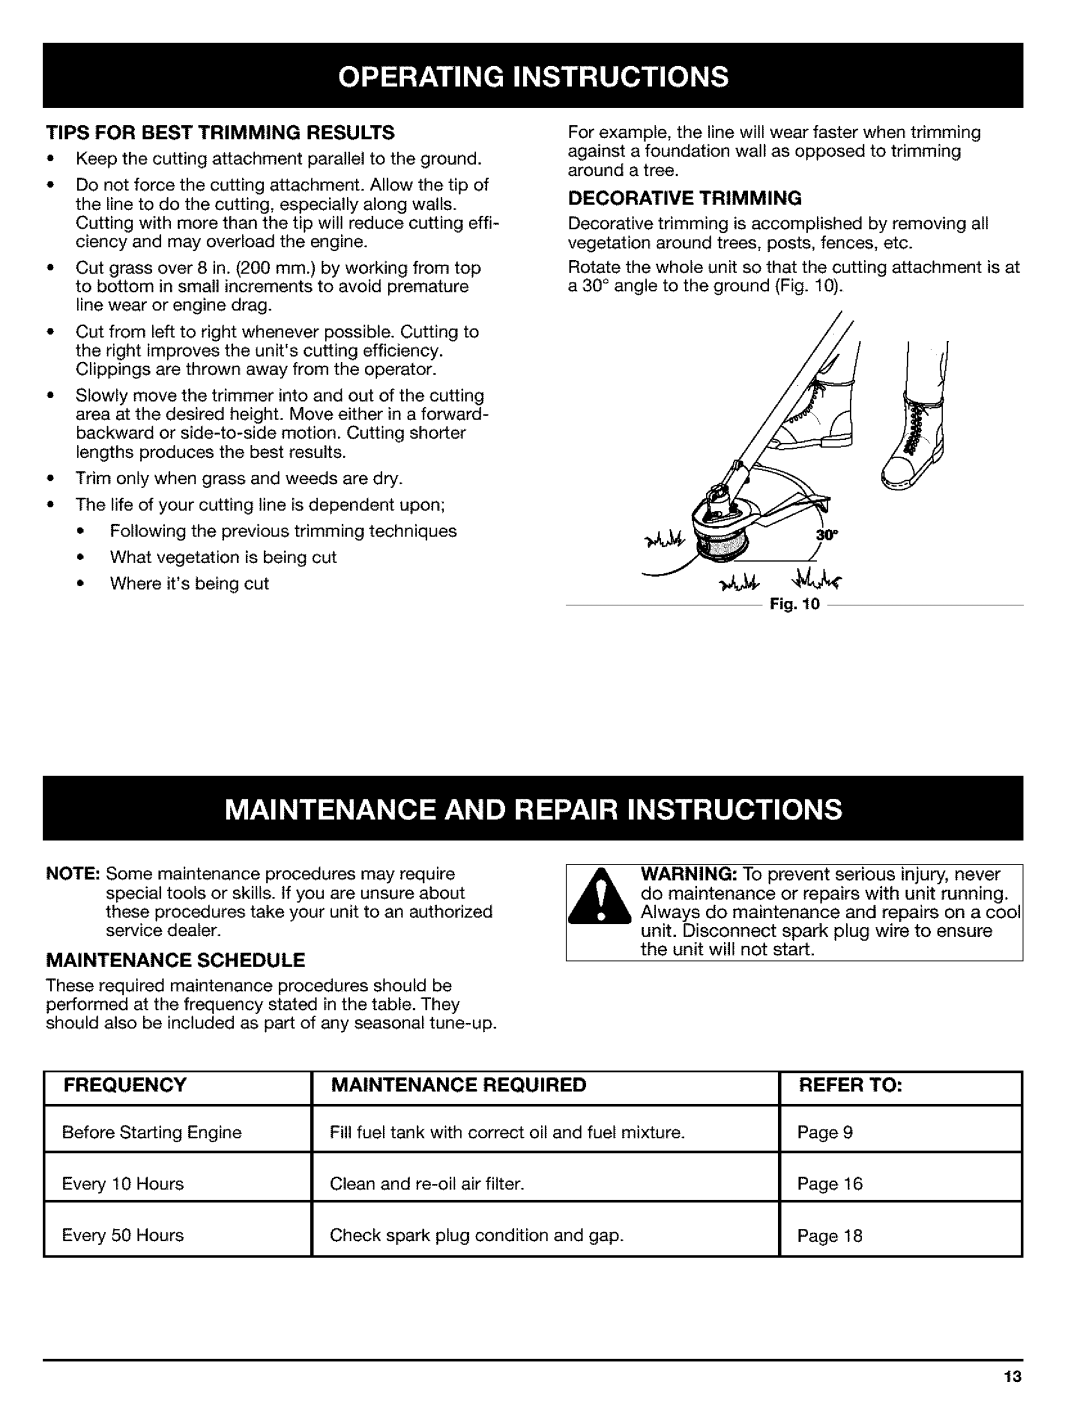 Ryobi Outdoor Trimmer manual Tips For Best Trimming Results, Decorative Trimming, Maintenance Schedule, Frequency, Required 